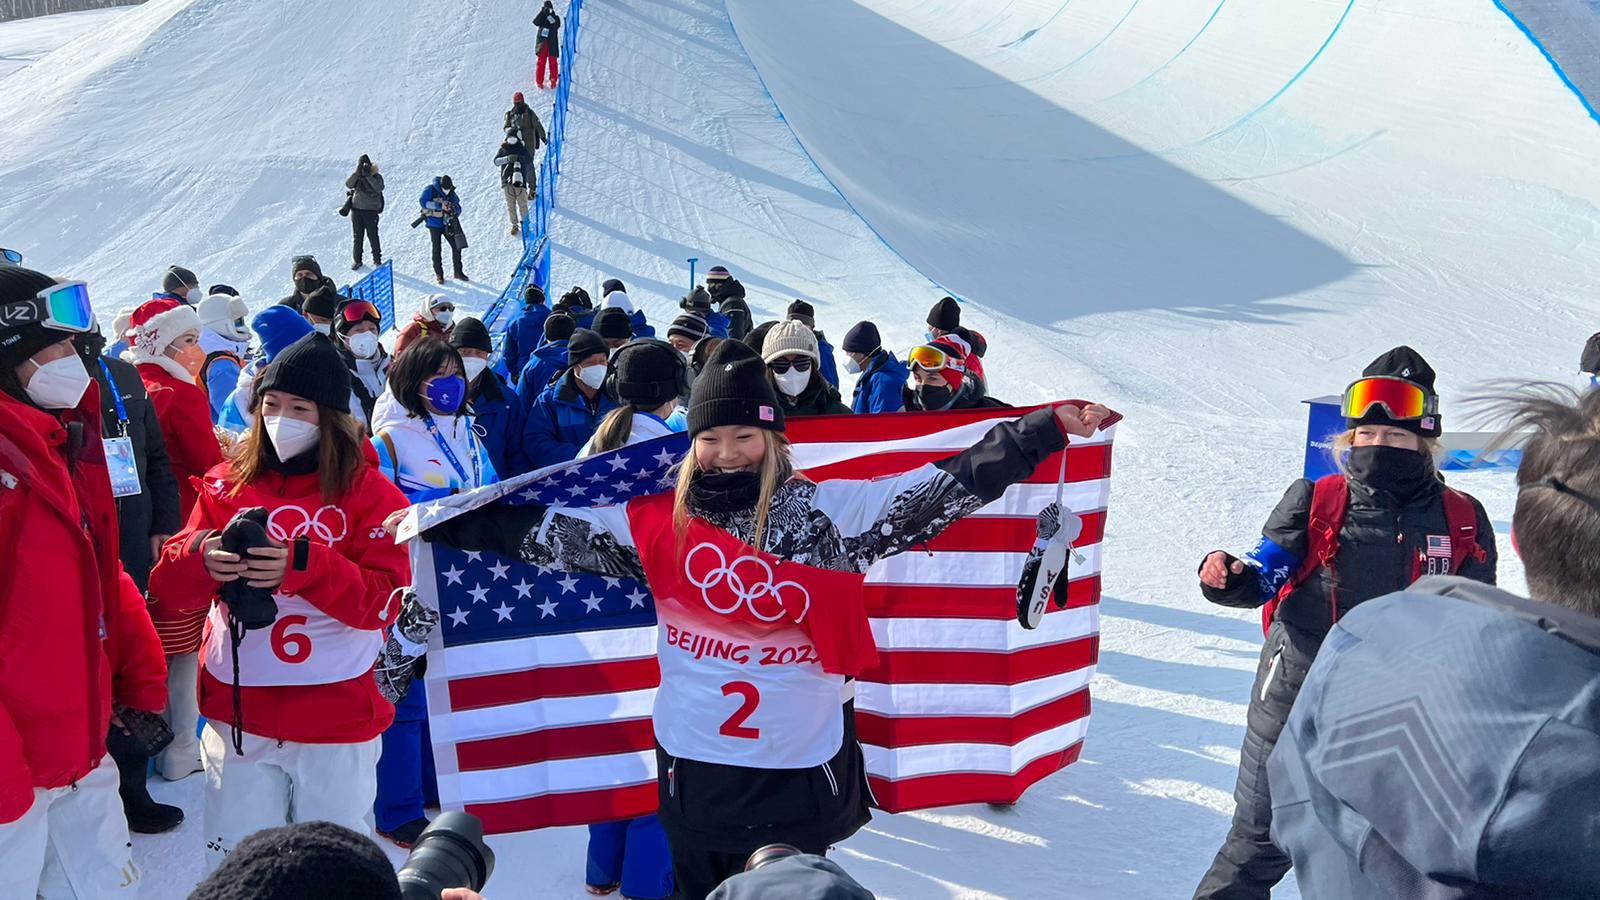 Chloe Kim celebrates with the US flag after winning gold medal in the women's snowboarding halfpipe final Thursday.